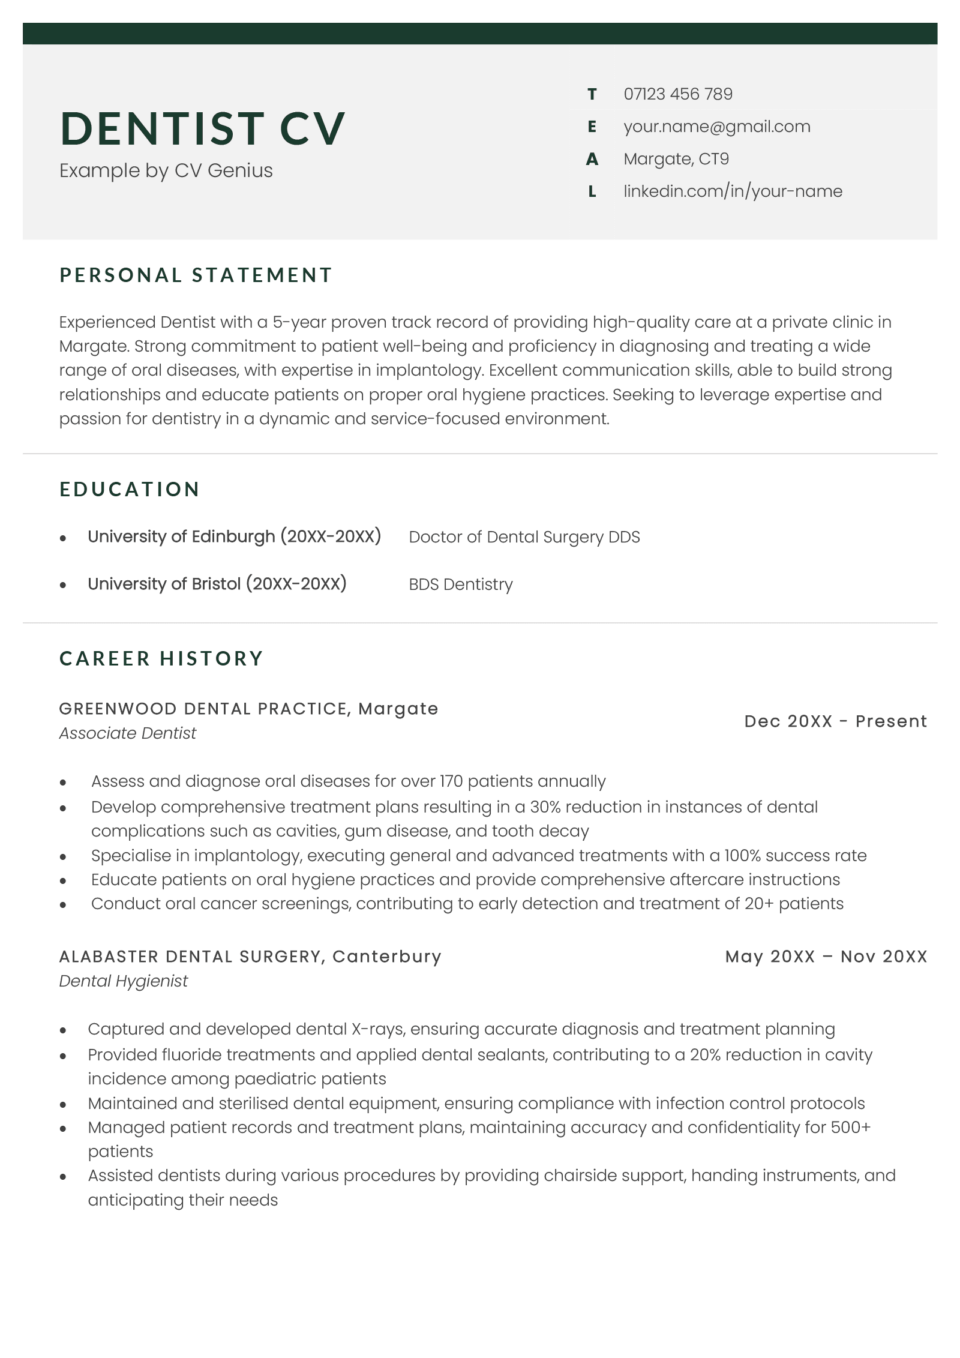 A dentist CV example template with a green header and the applicants key qualifications and experiences laid out in a standard format.